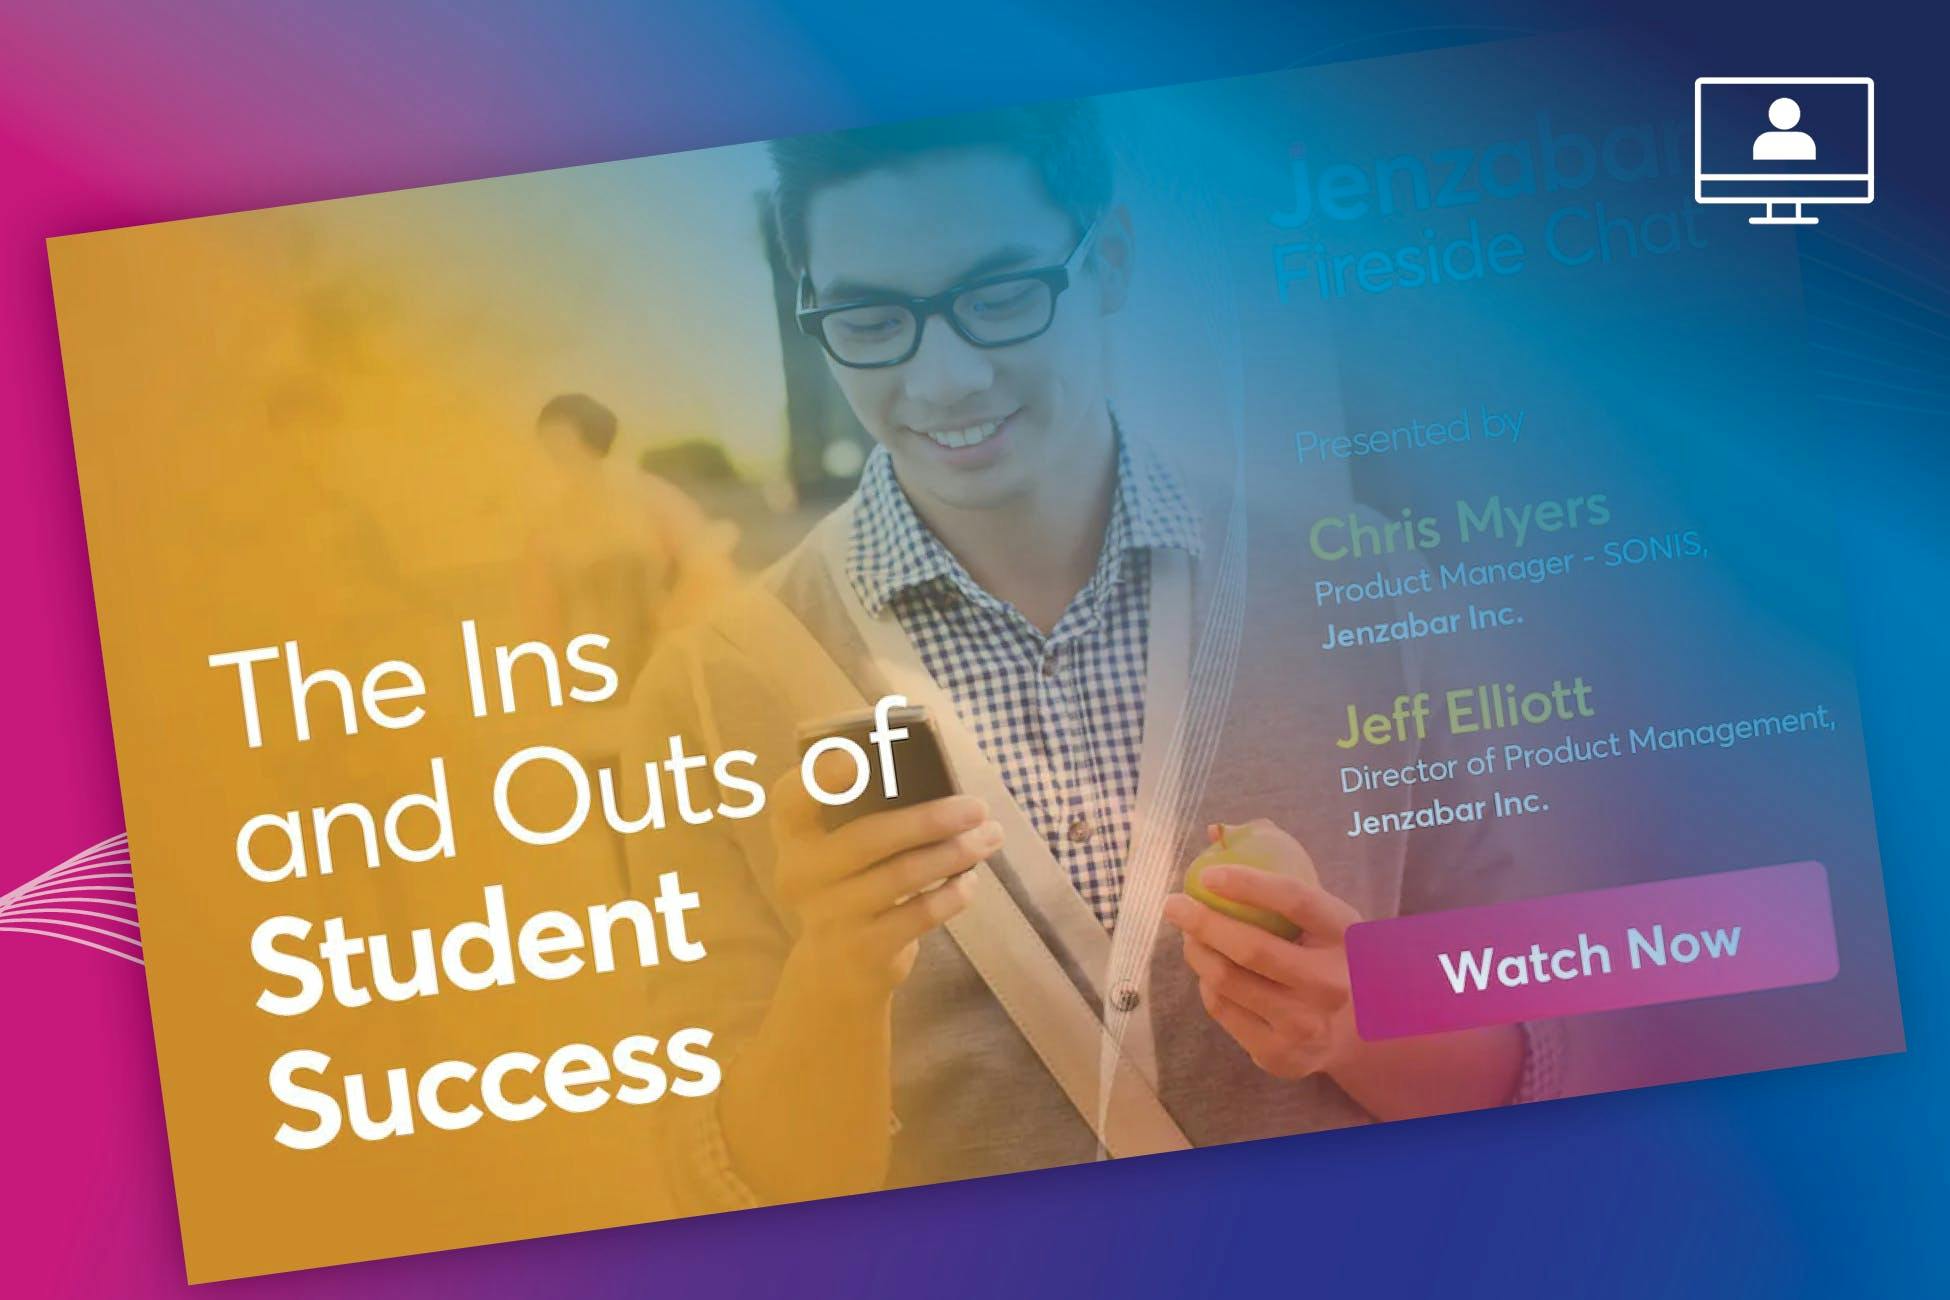 Fireside Chat: The Ins and Outs of Student Success